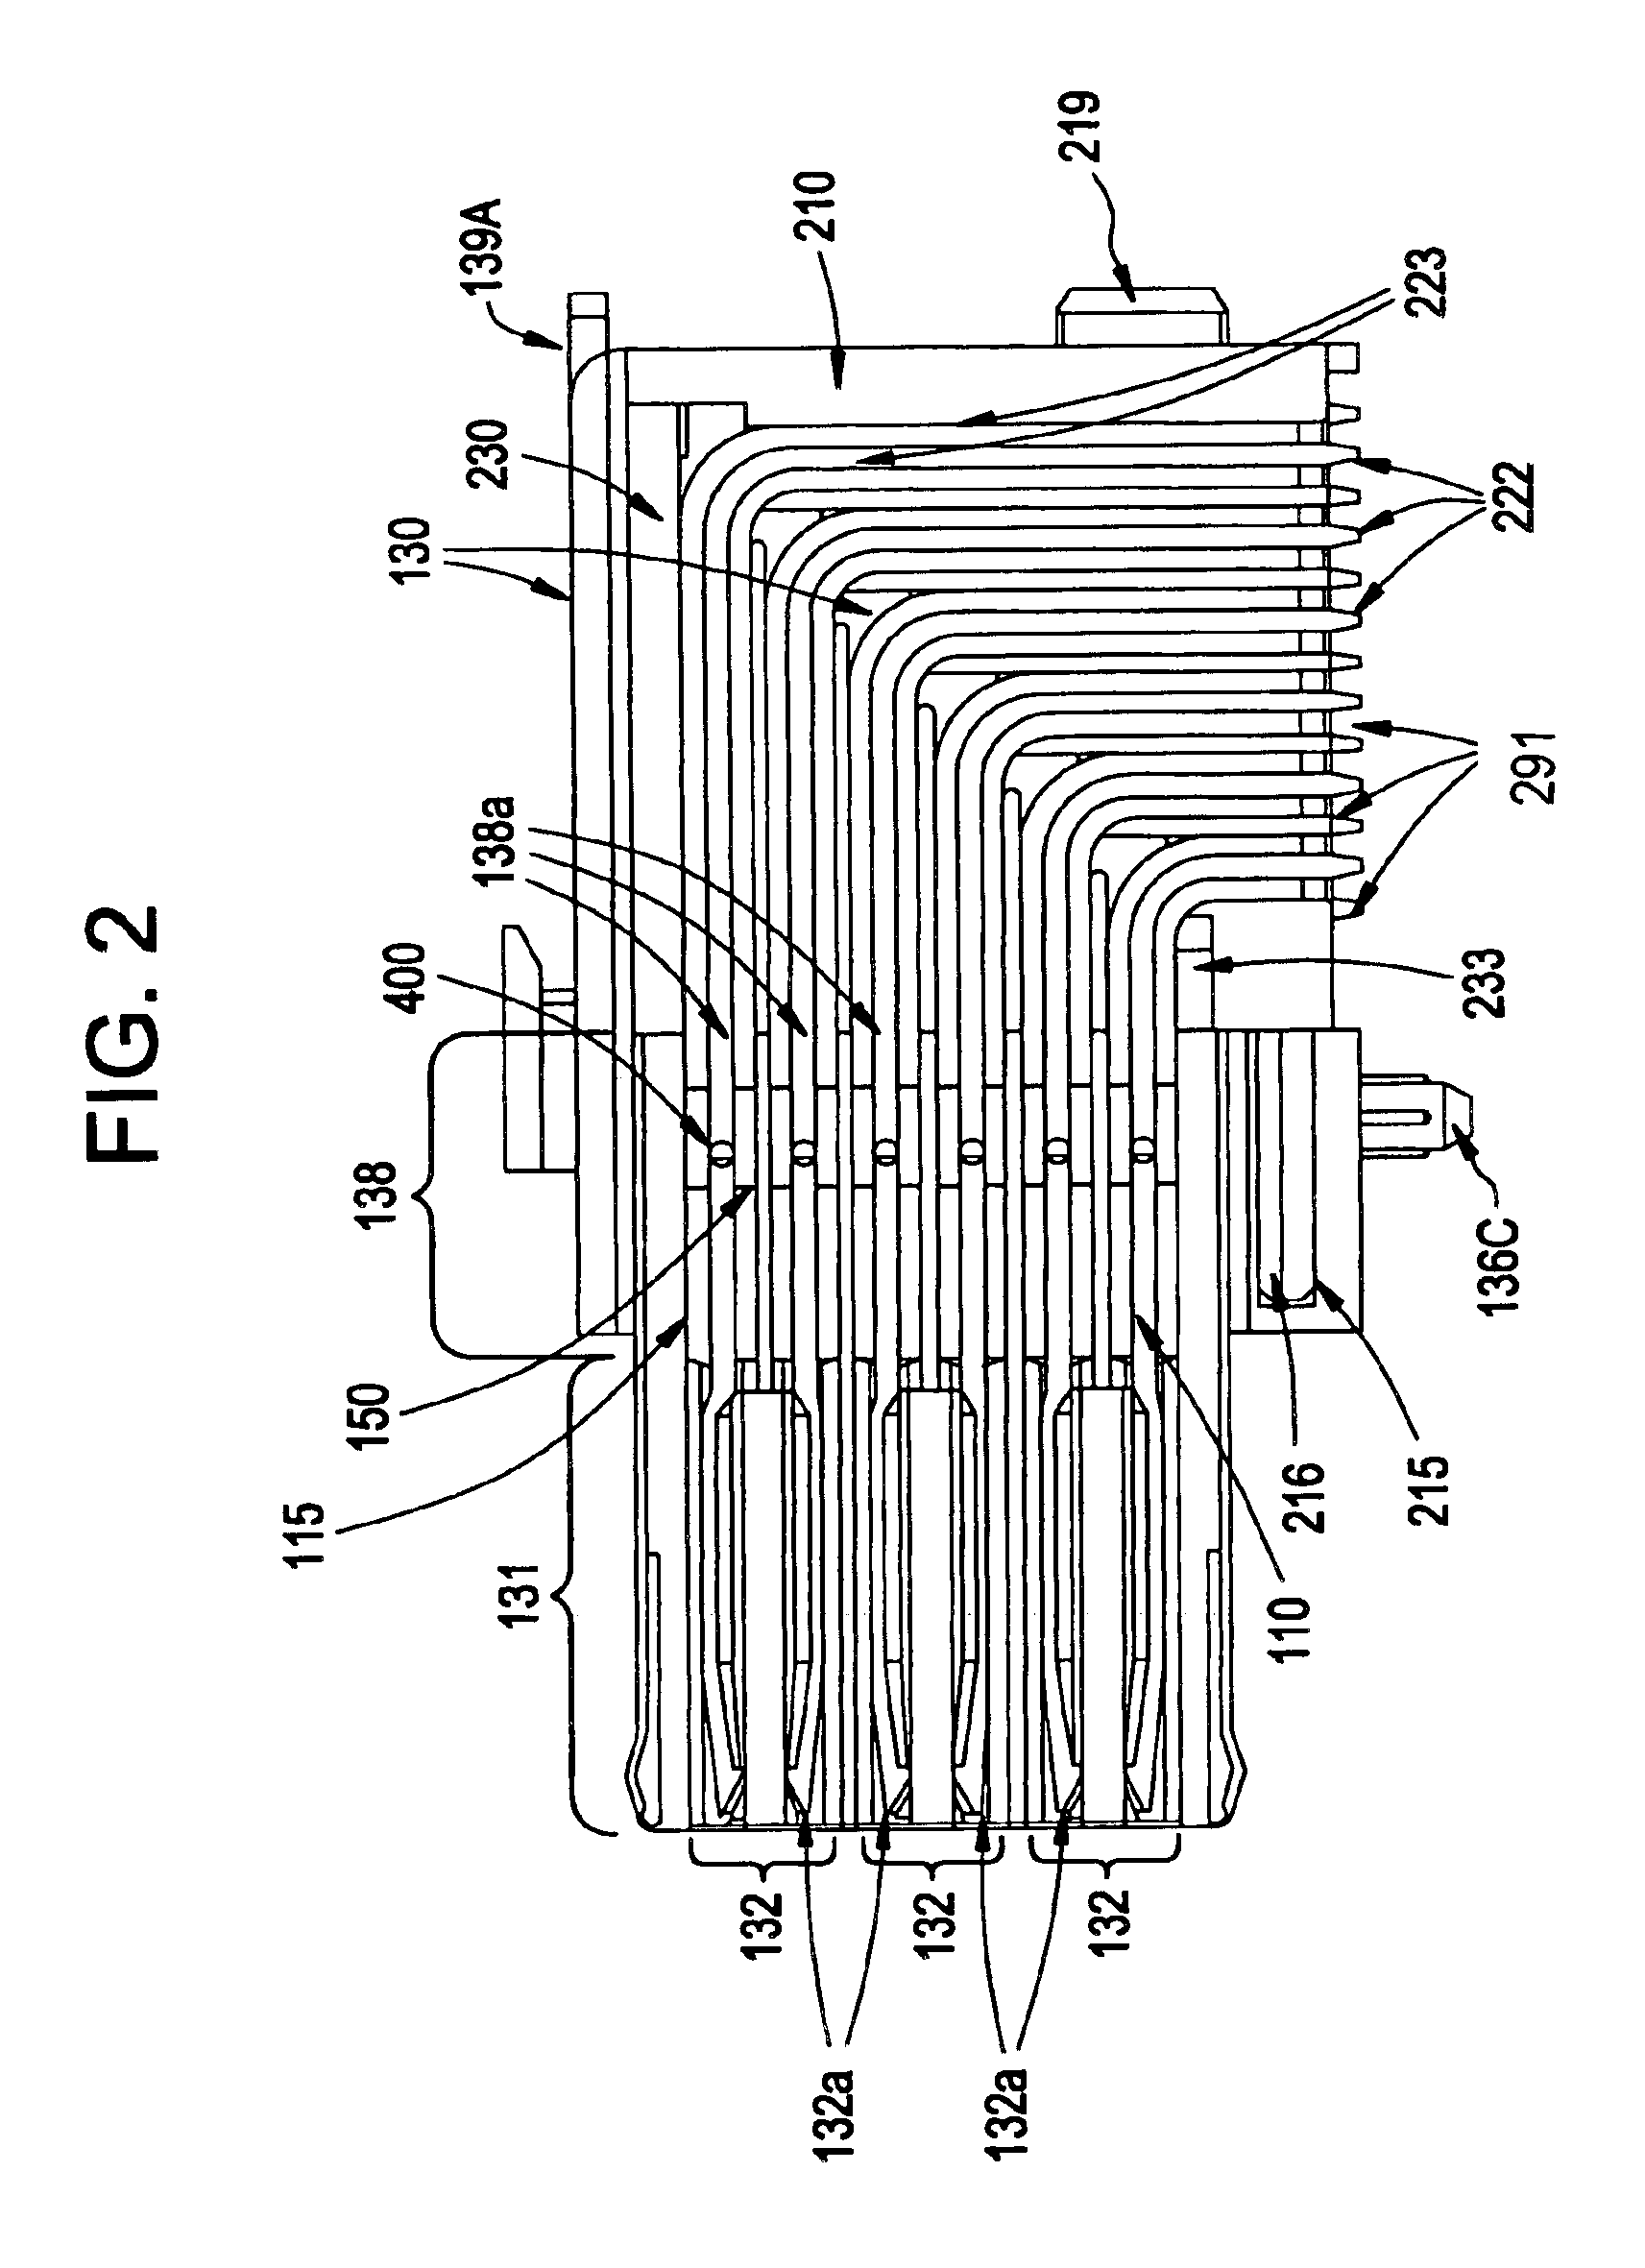 Modular coaxial electrical interconnect system having a modular frame and electrically shielded signal paths and a method of making the same